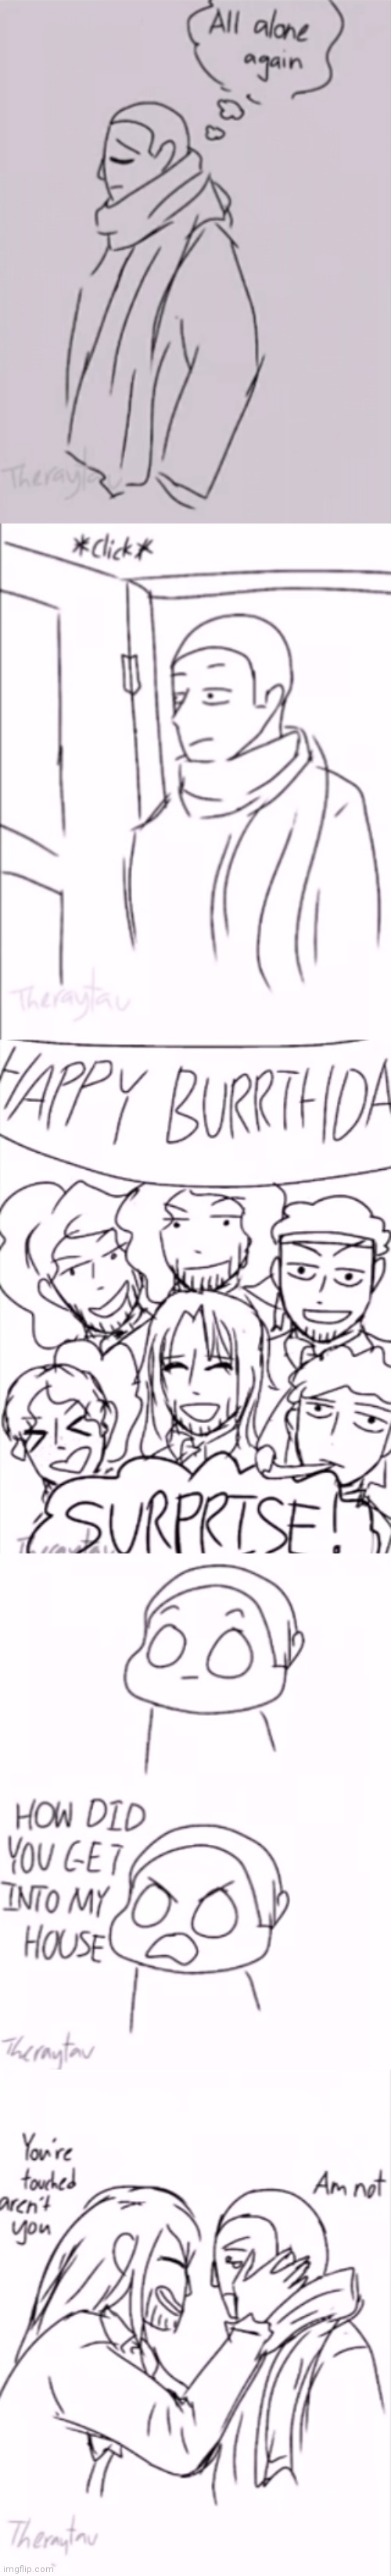 Haha BURRthday | image tagged in lol,burr,puns | made w/ Imgflip meme maker